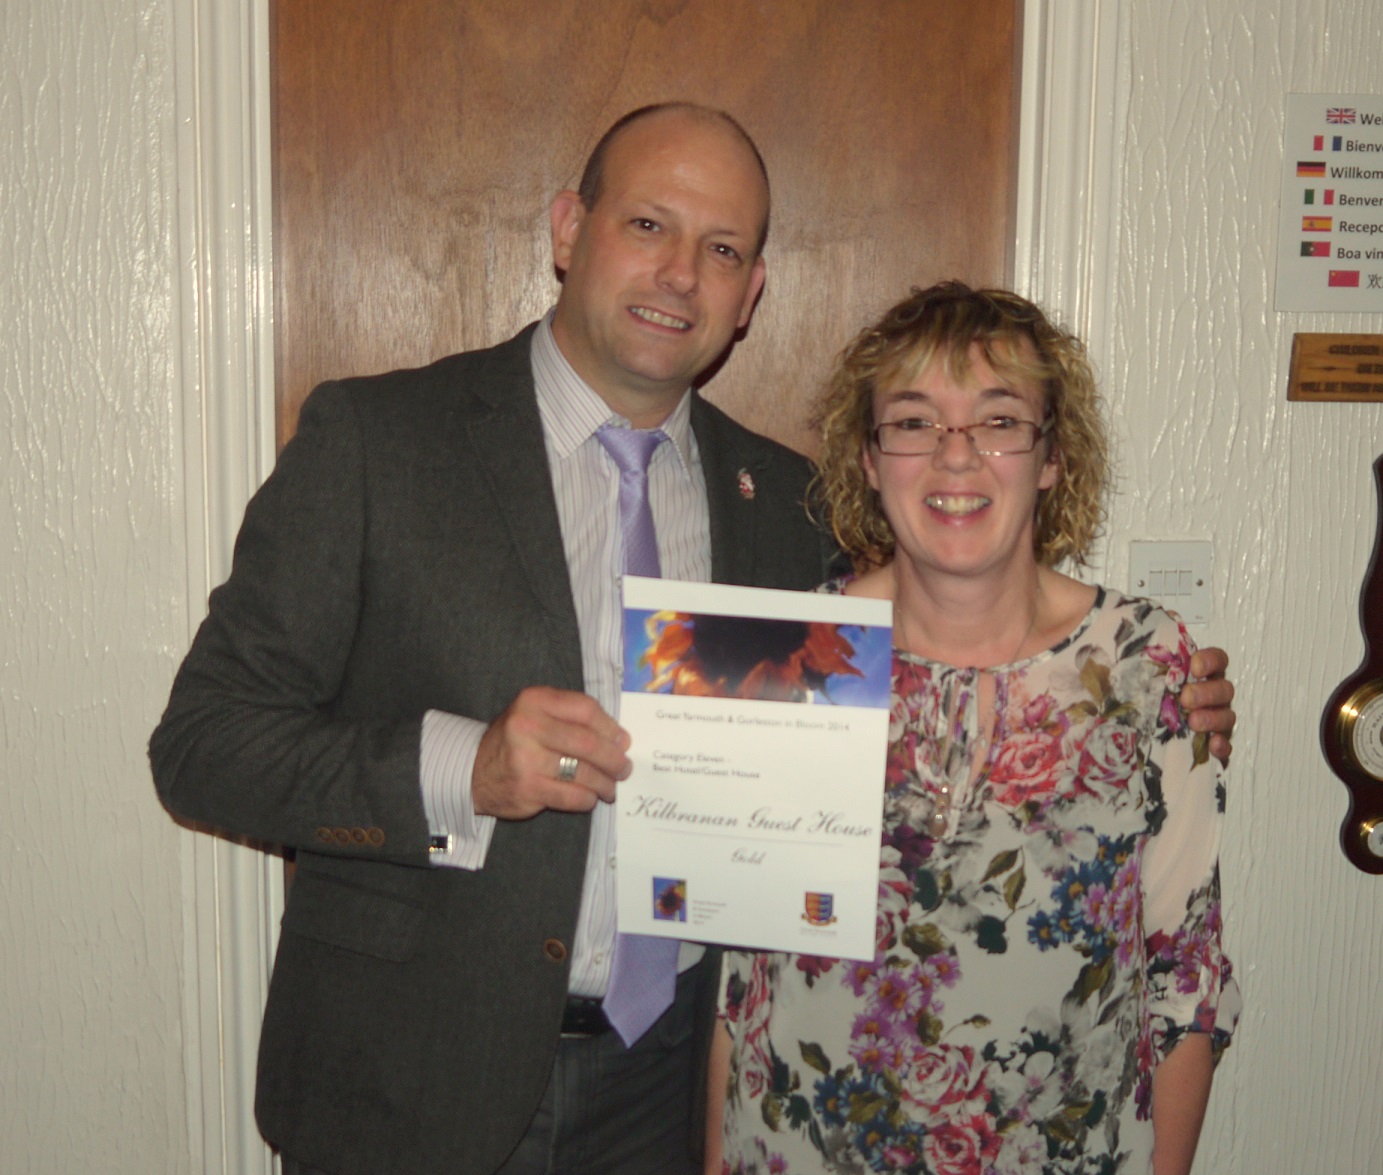 photo of gary and julie receiving an in bloom award